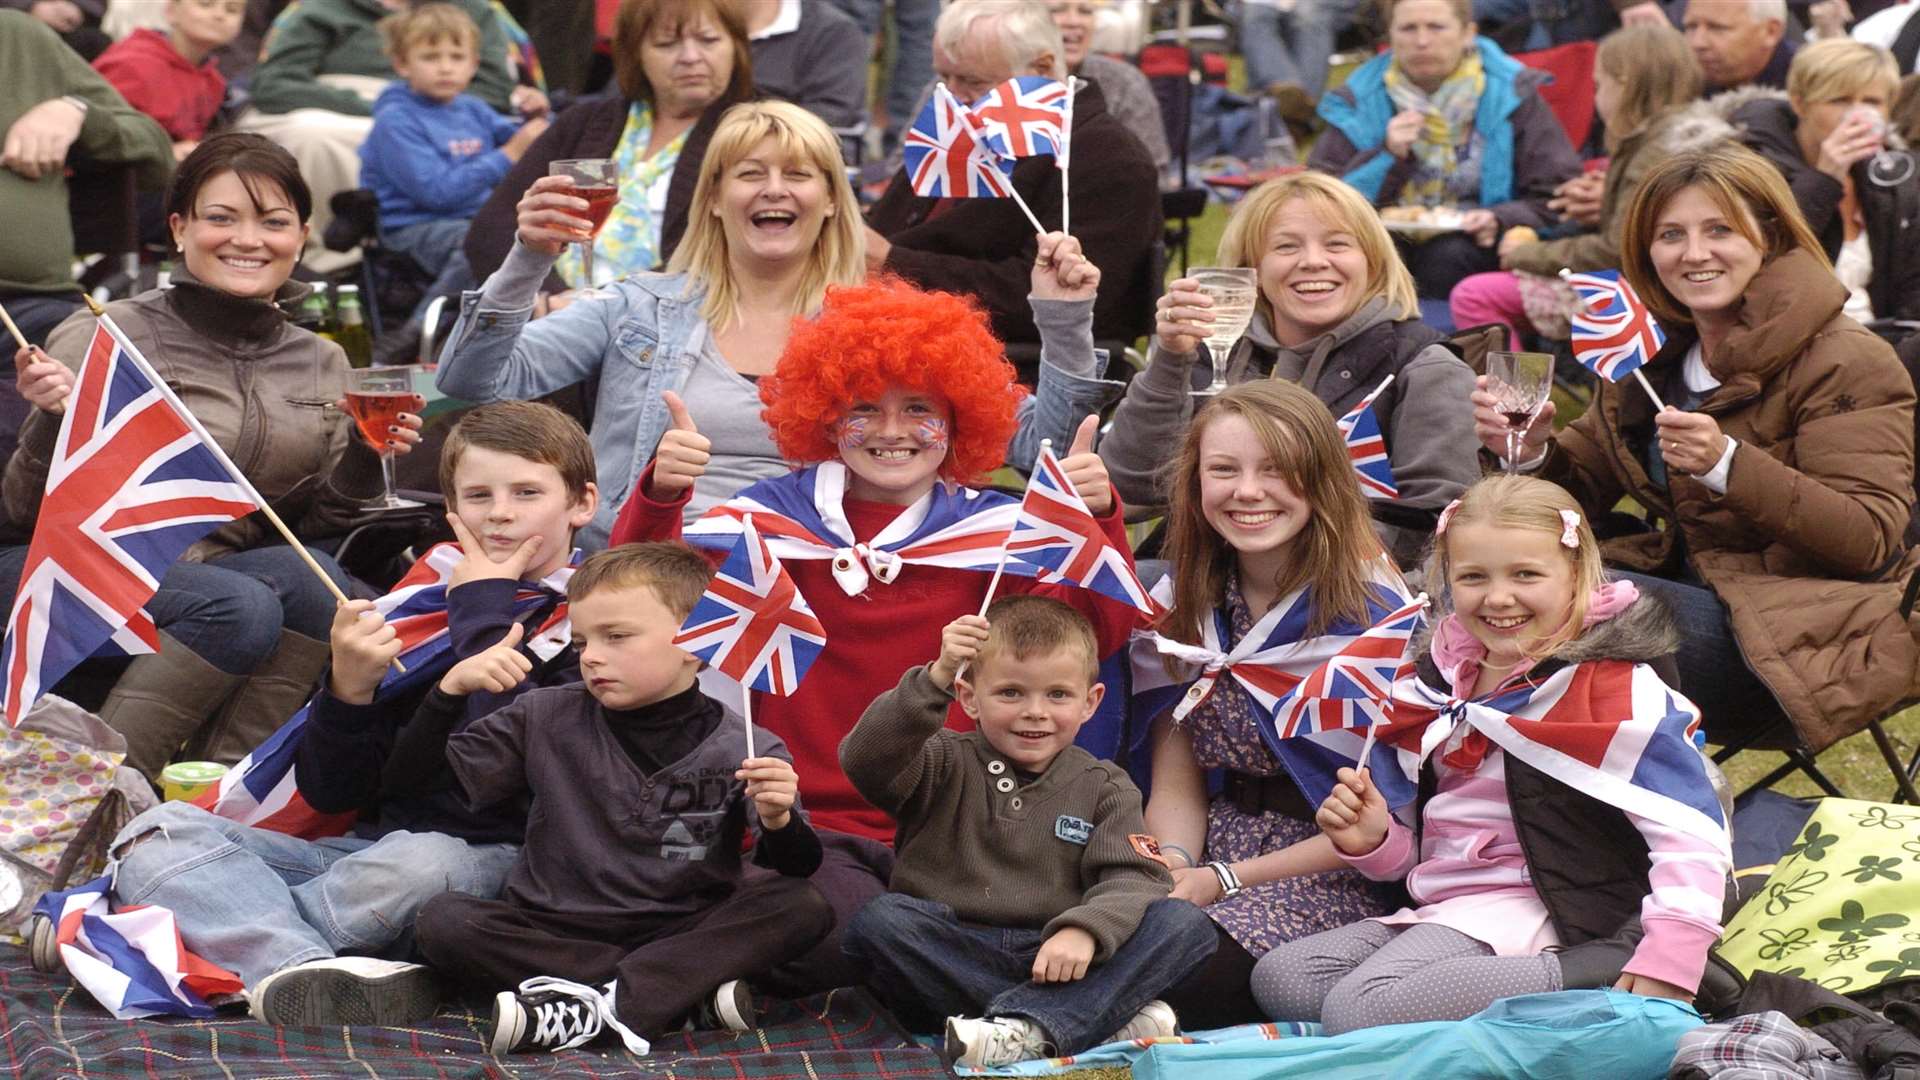 Free family fun at Maidstone Proms in the Park